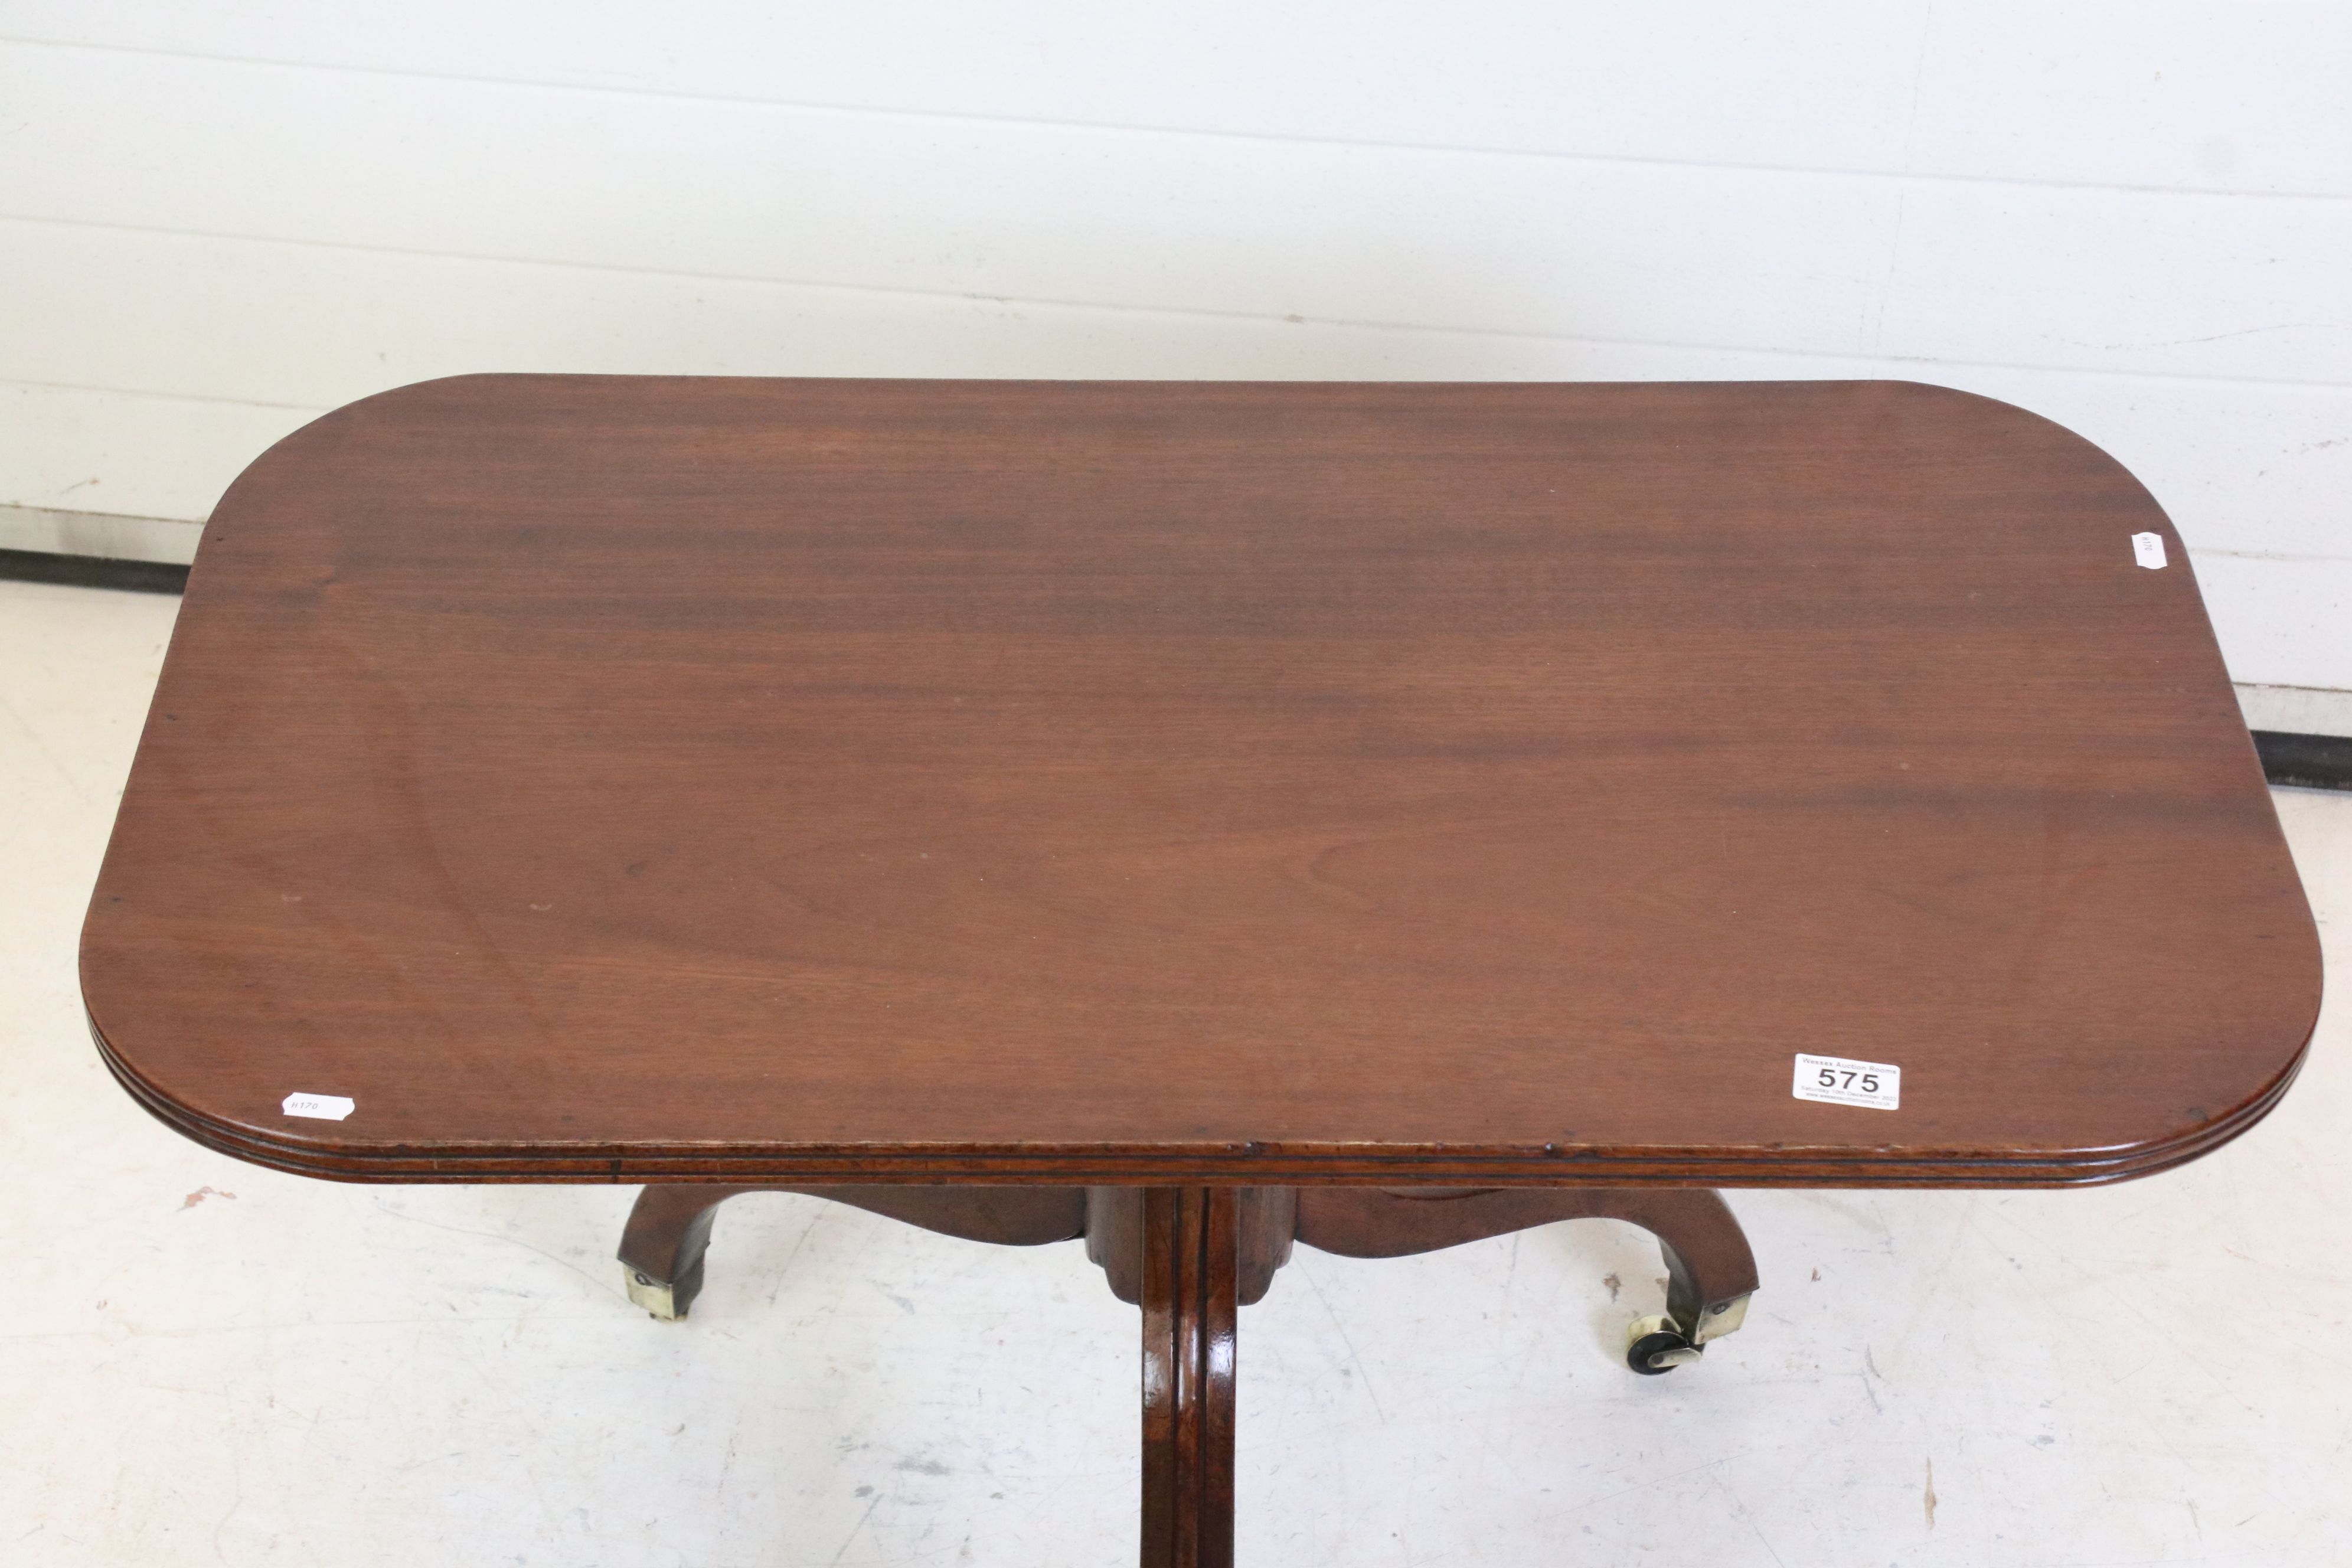 19th century Mahogany Rectangular Low Table raised on a turned column and three splay legs with - Image 2 of 4